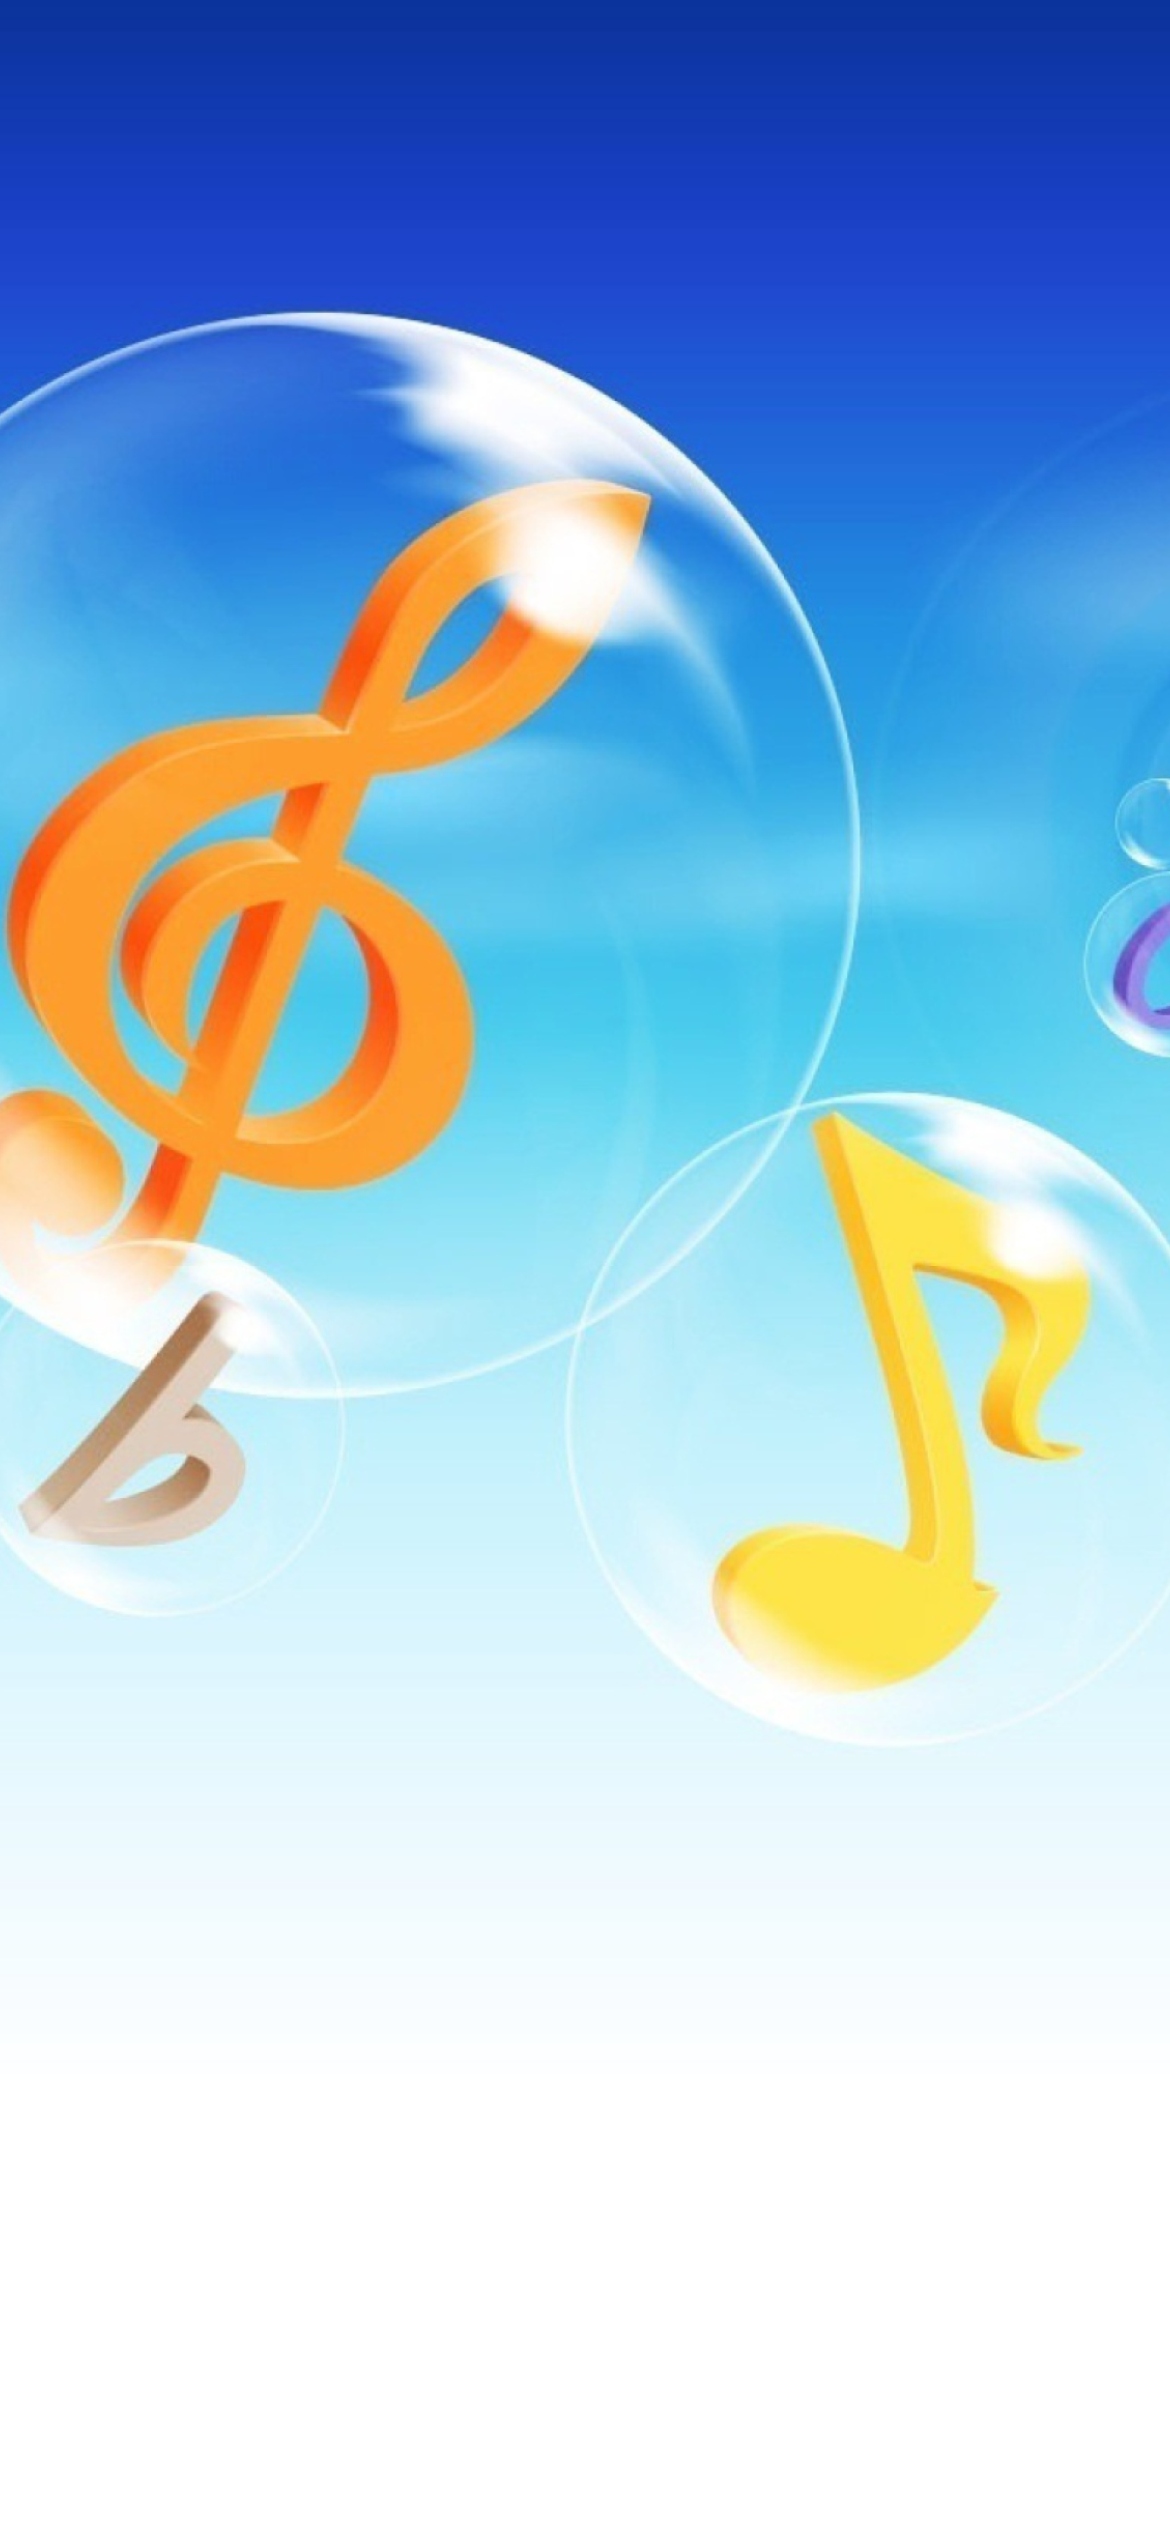 Musical Notes In Bubbles wallpaper 1170x2532